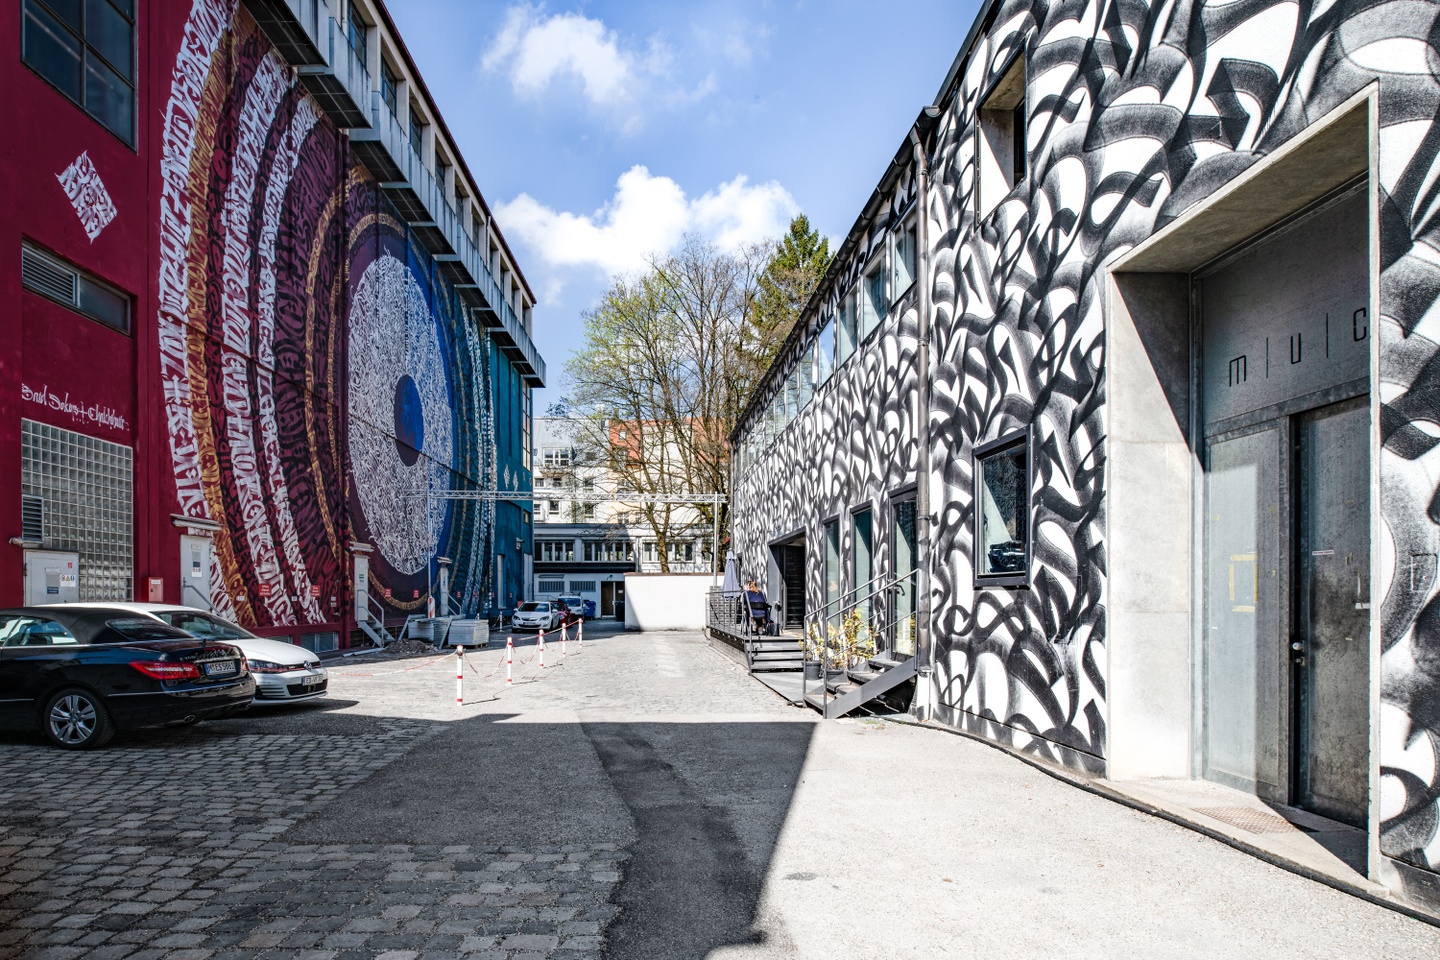 Alleyway between two industrial-looking buildings with bold, graphic mural painting on the exterior.